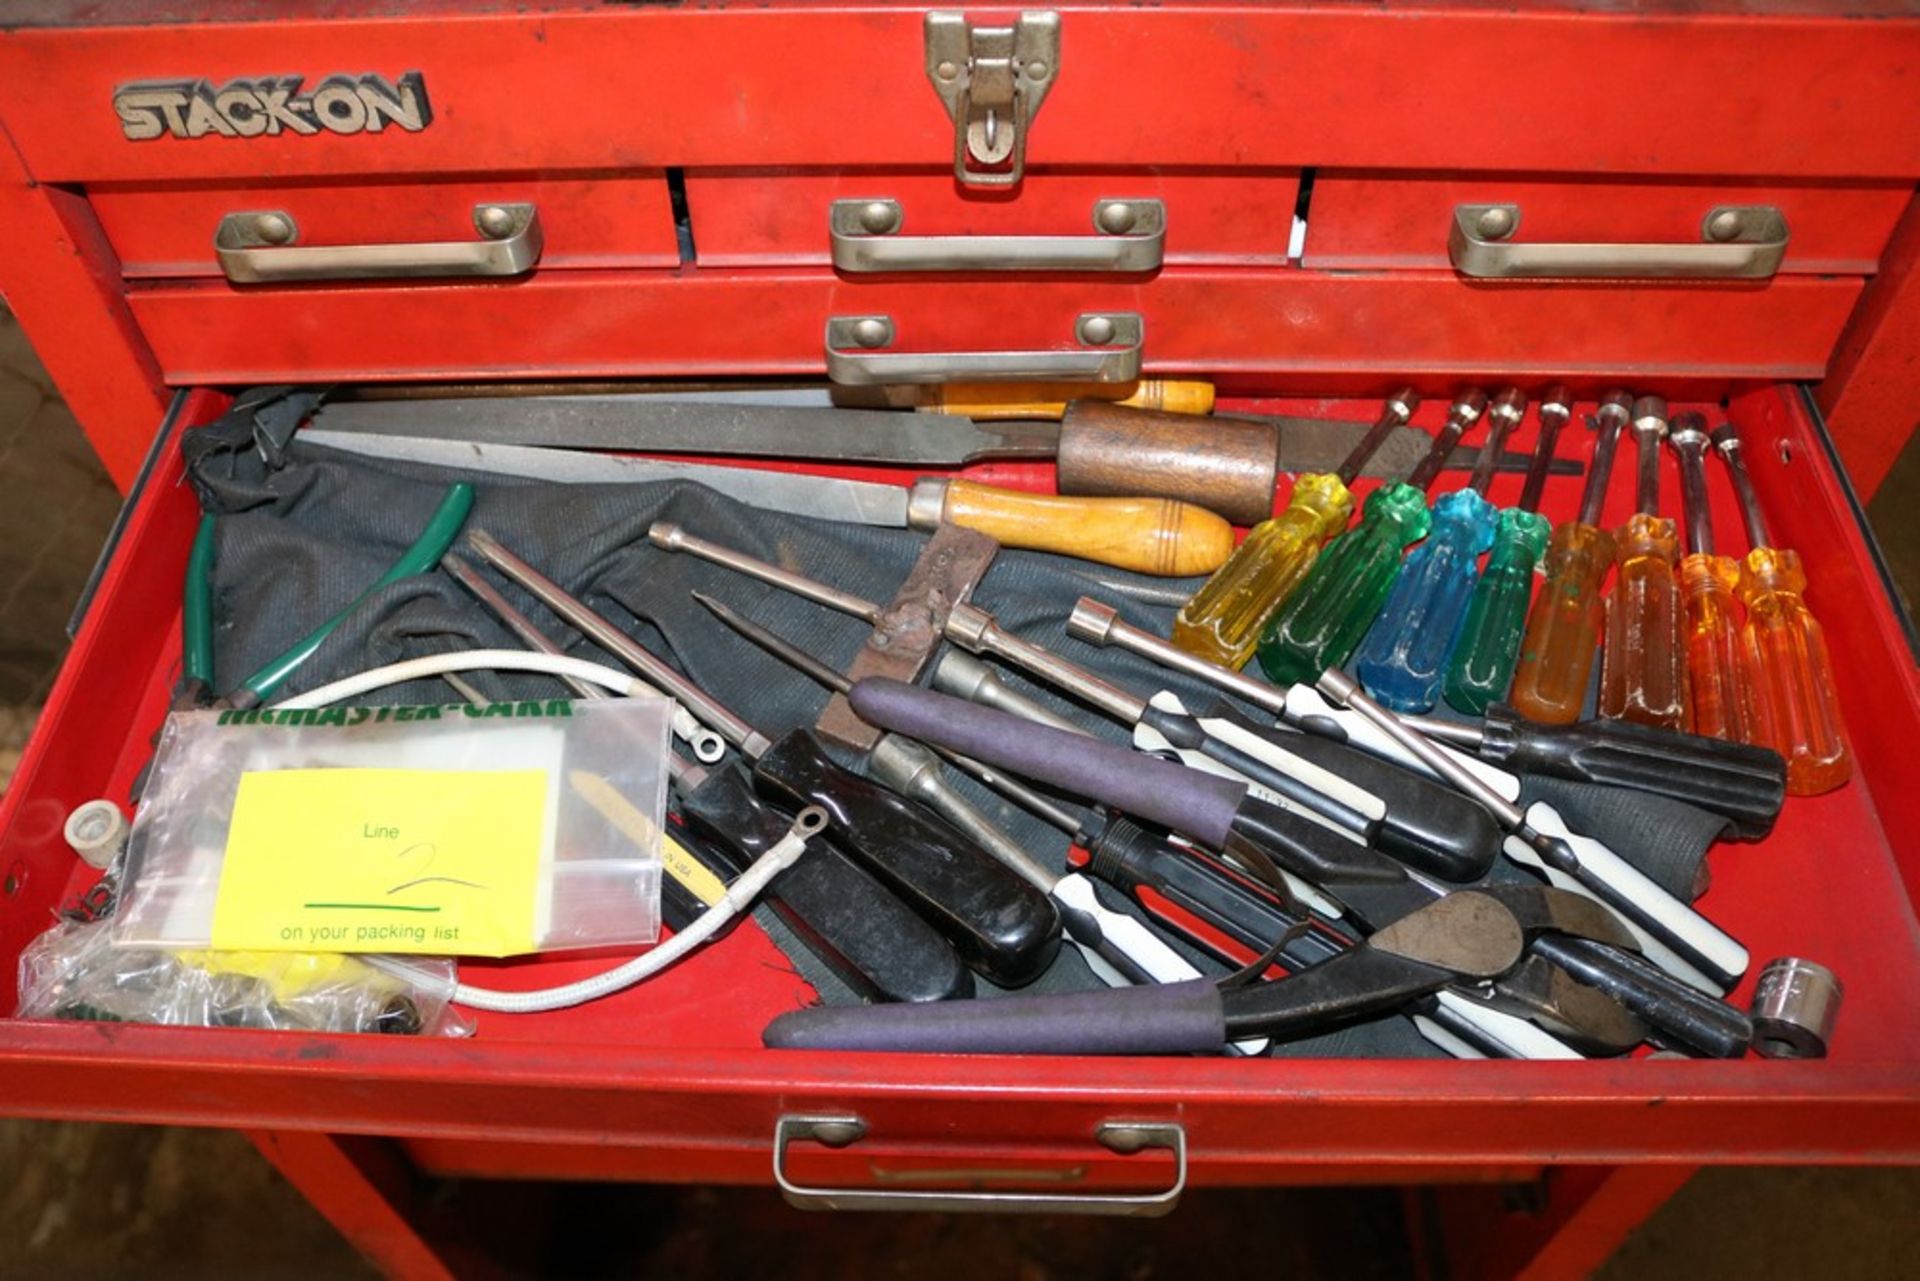 Stackon Rolling Tool Box with Contents "Pnuematic Tools, Tooling, Handtools and Others" - Image 4 of 8